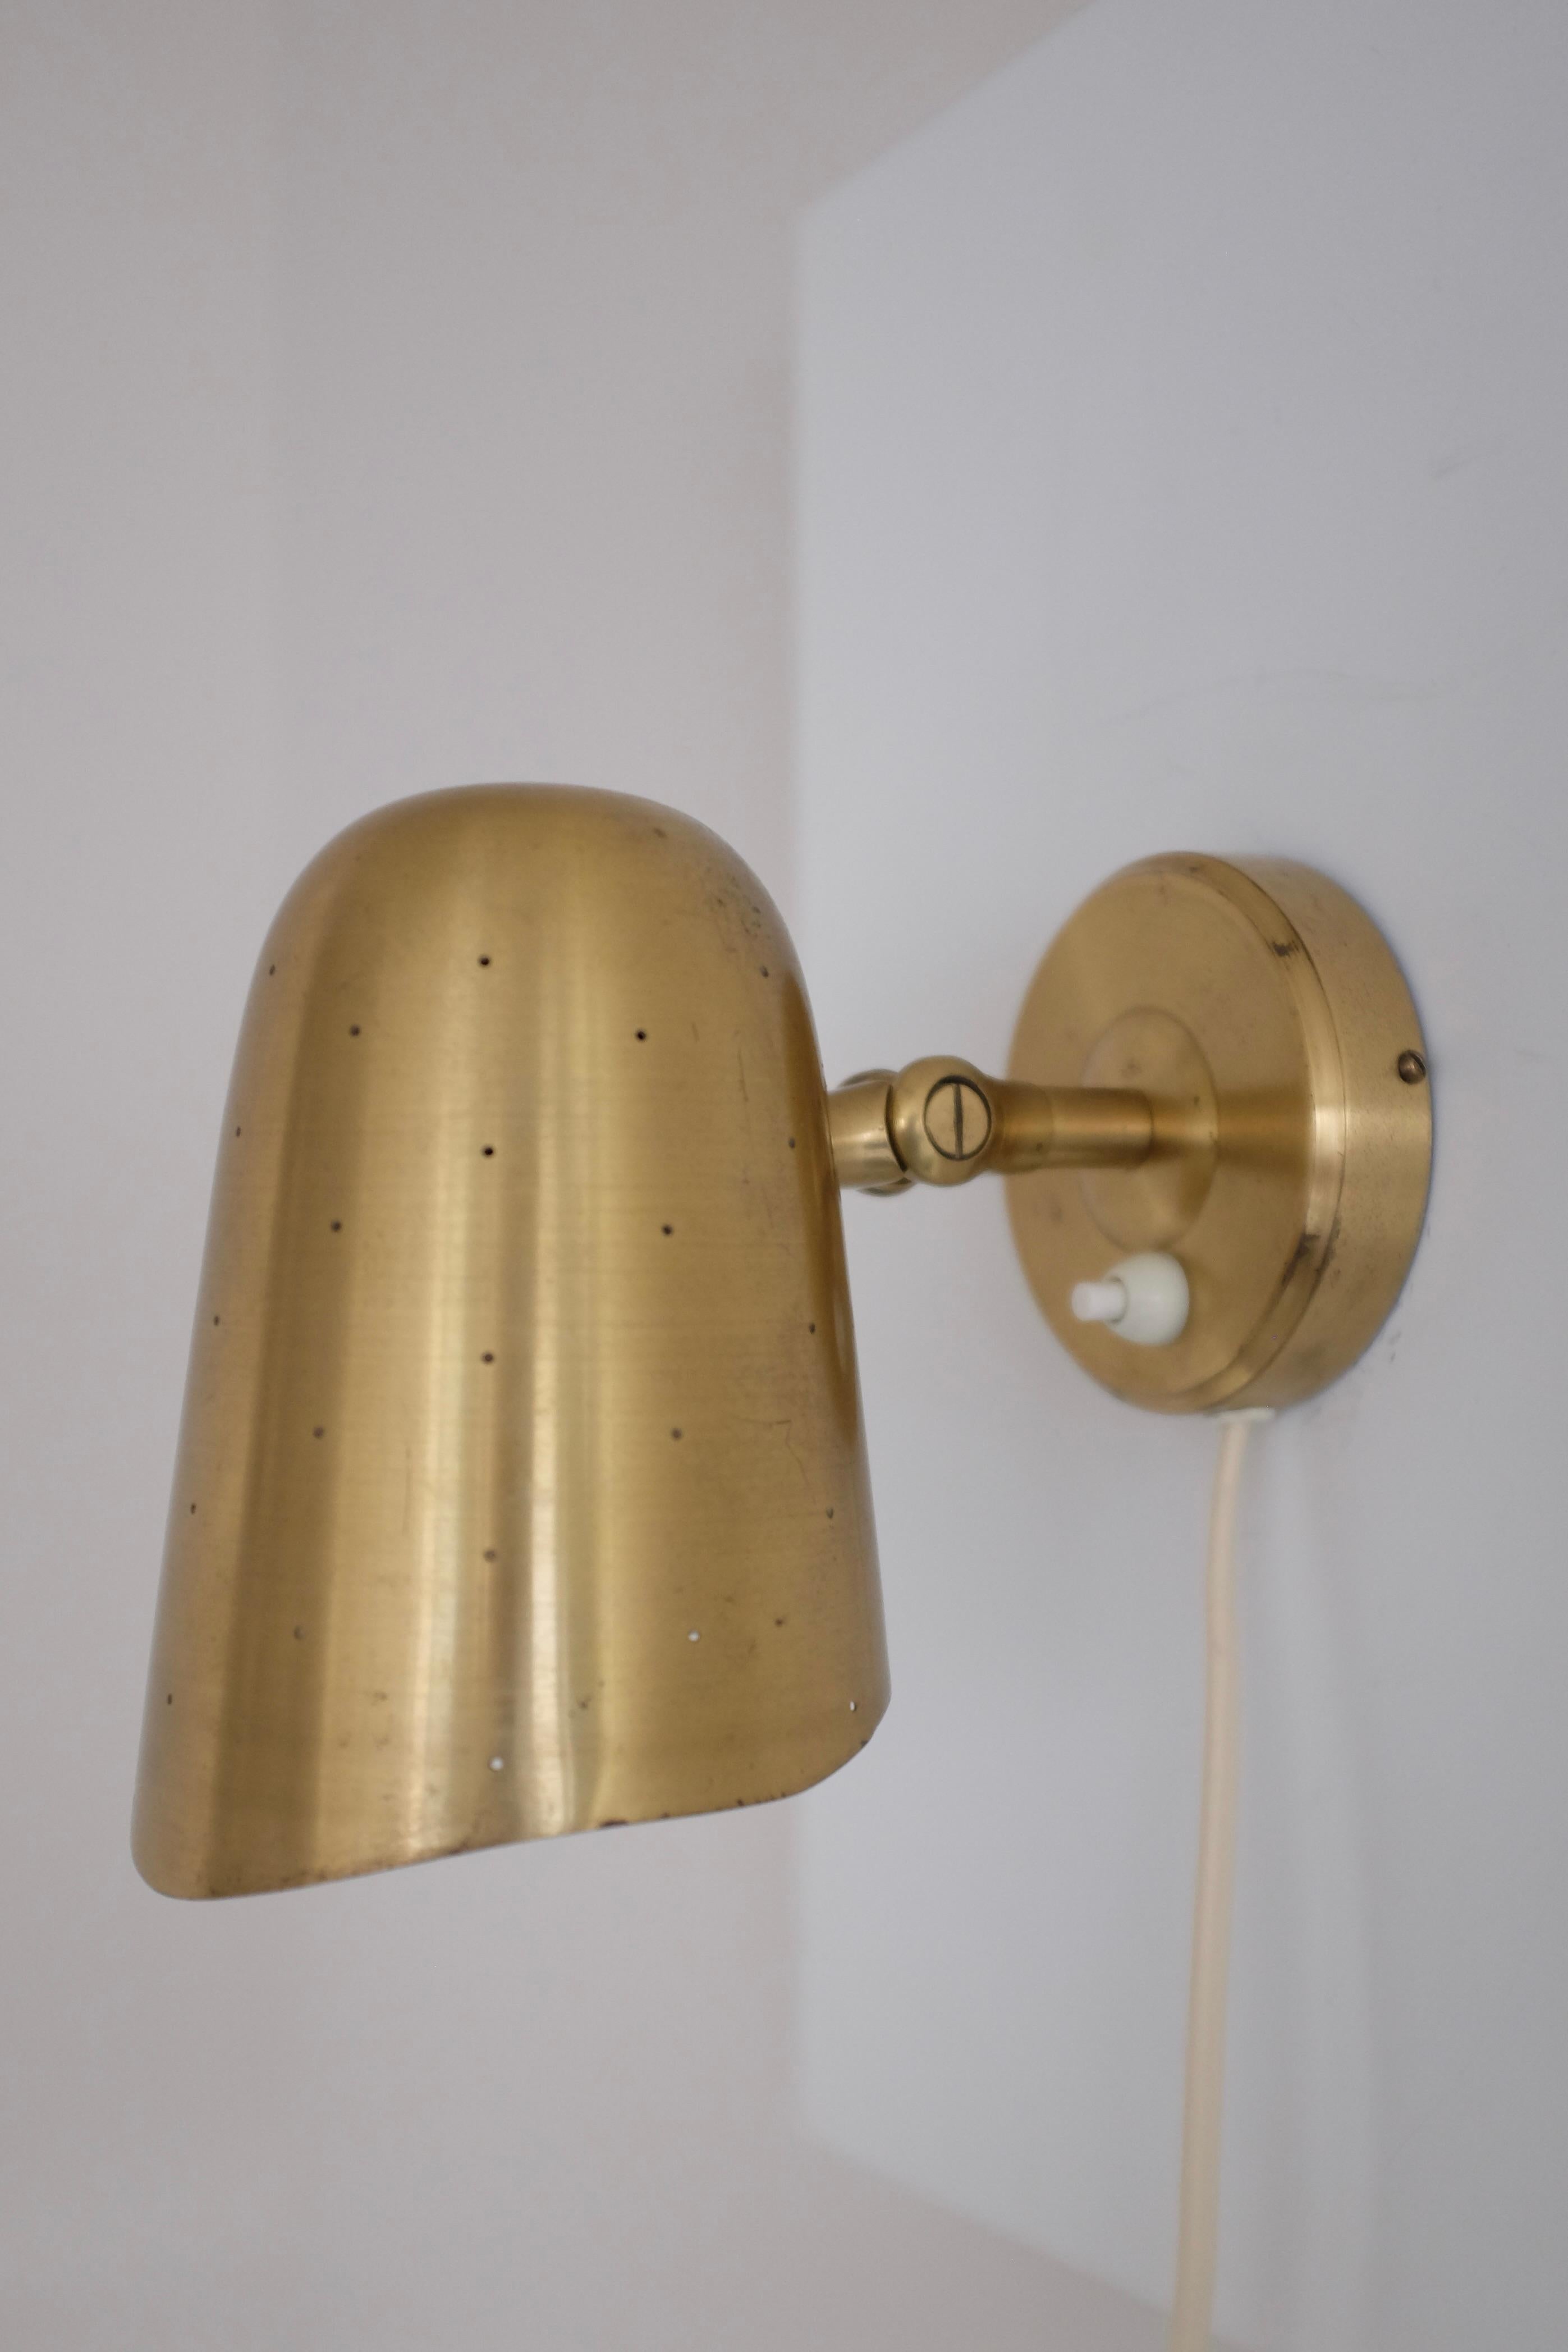 Brass wall lamp in modell 6506 by Boréns, Sweden. Beautiful perforated shade with a wavy shape to the edge. Can be used as a small side light or mounted as a wall lamp. Patina to the brass and overall in a good condition. 

Dimensions: D 9 in. x H 6